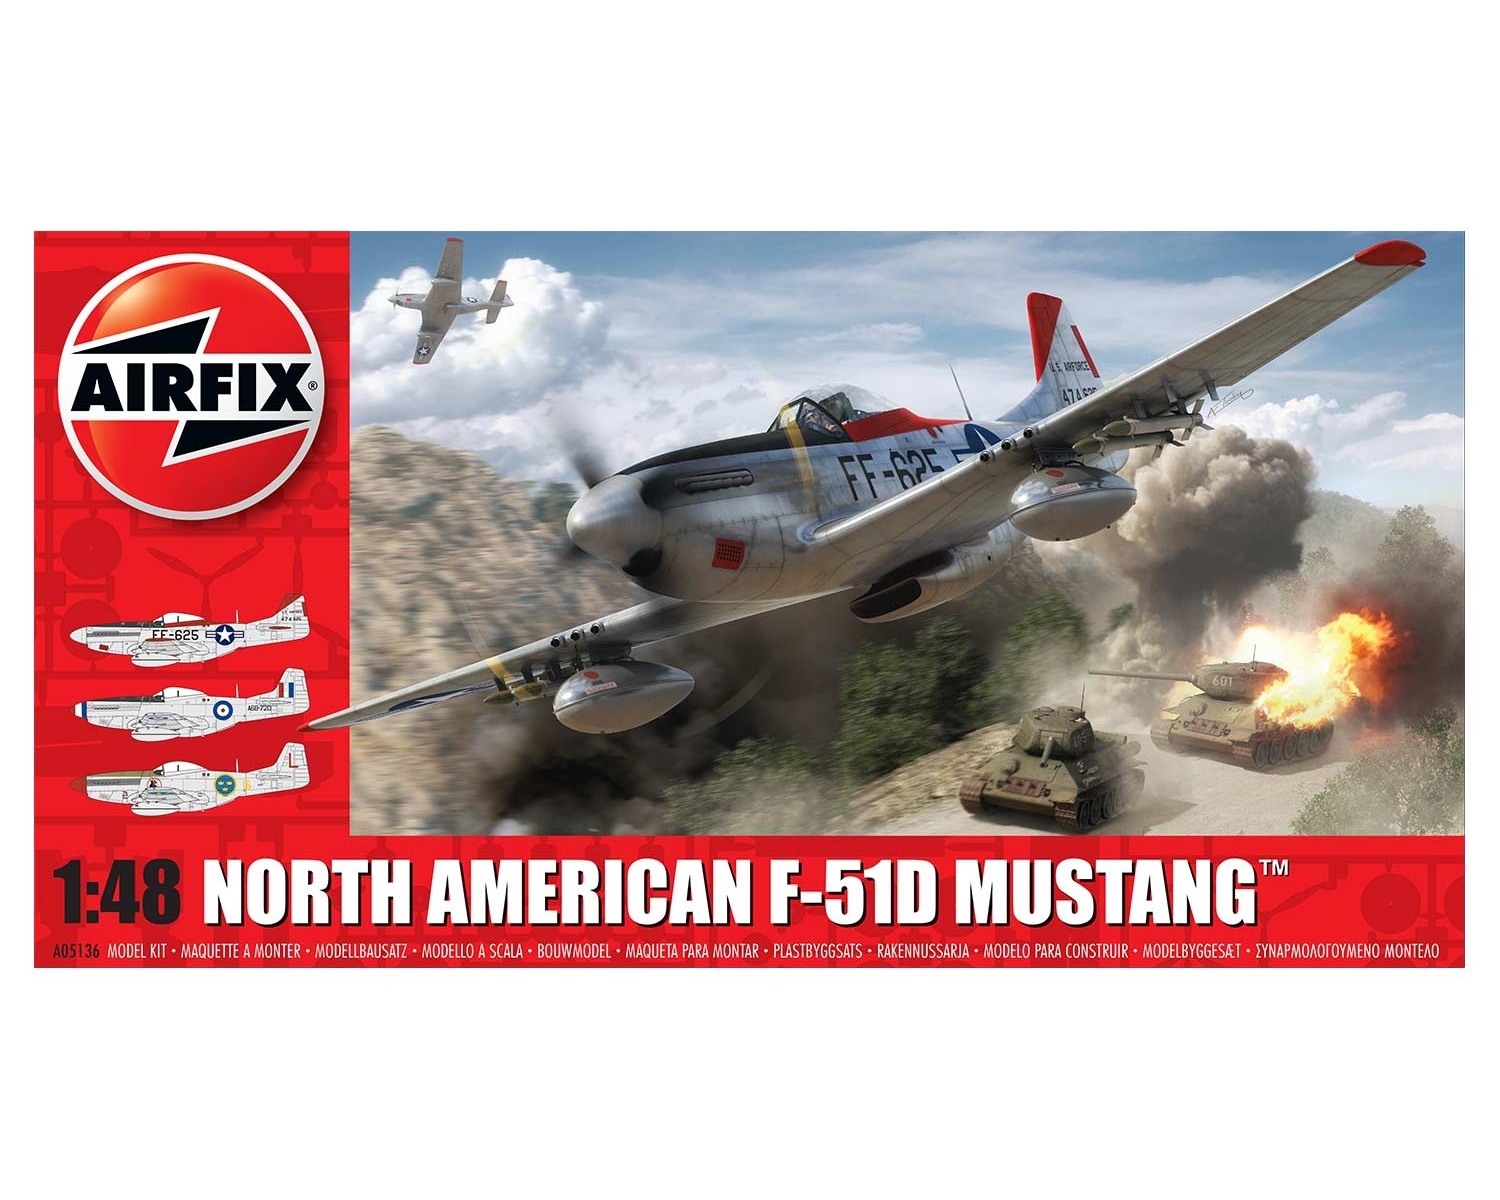 Airfix 05136 - NORTH AMERICAN F51D MUSTANG